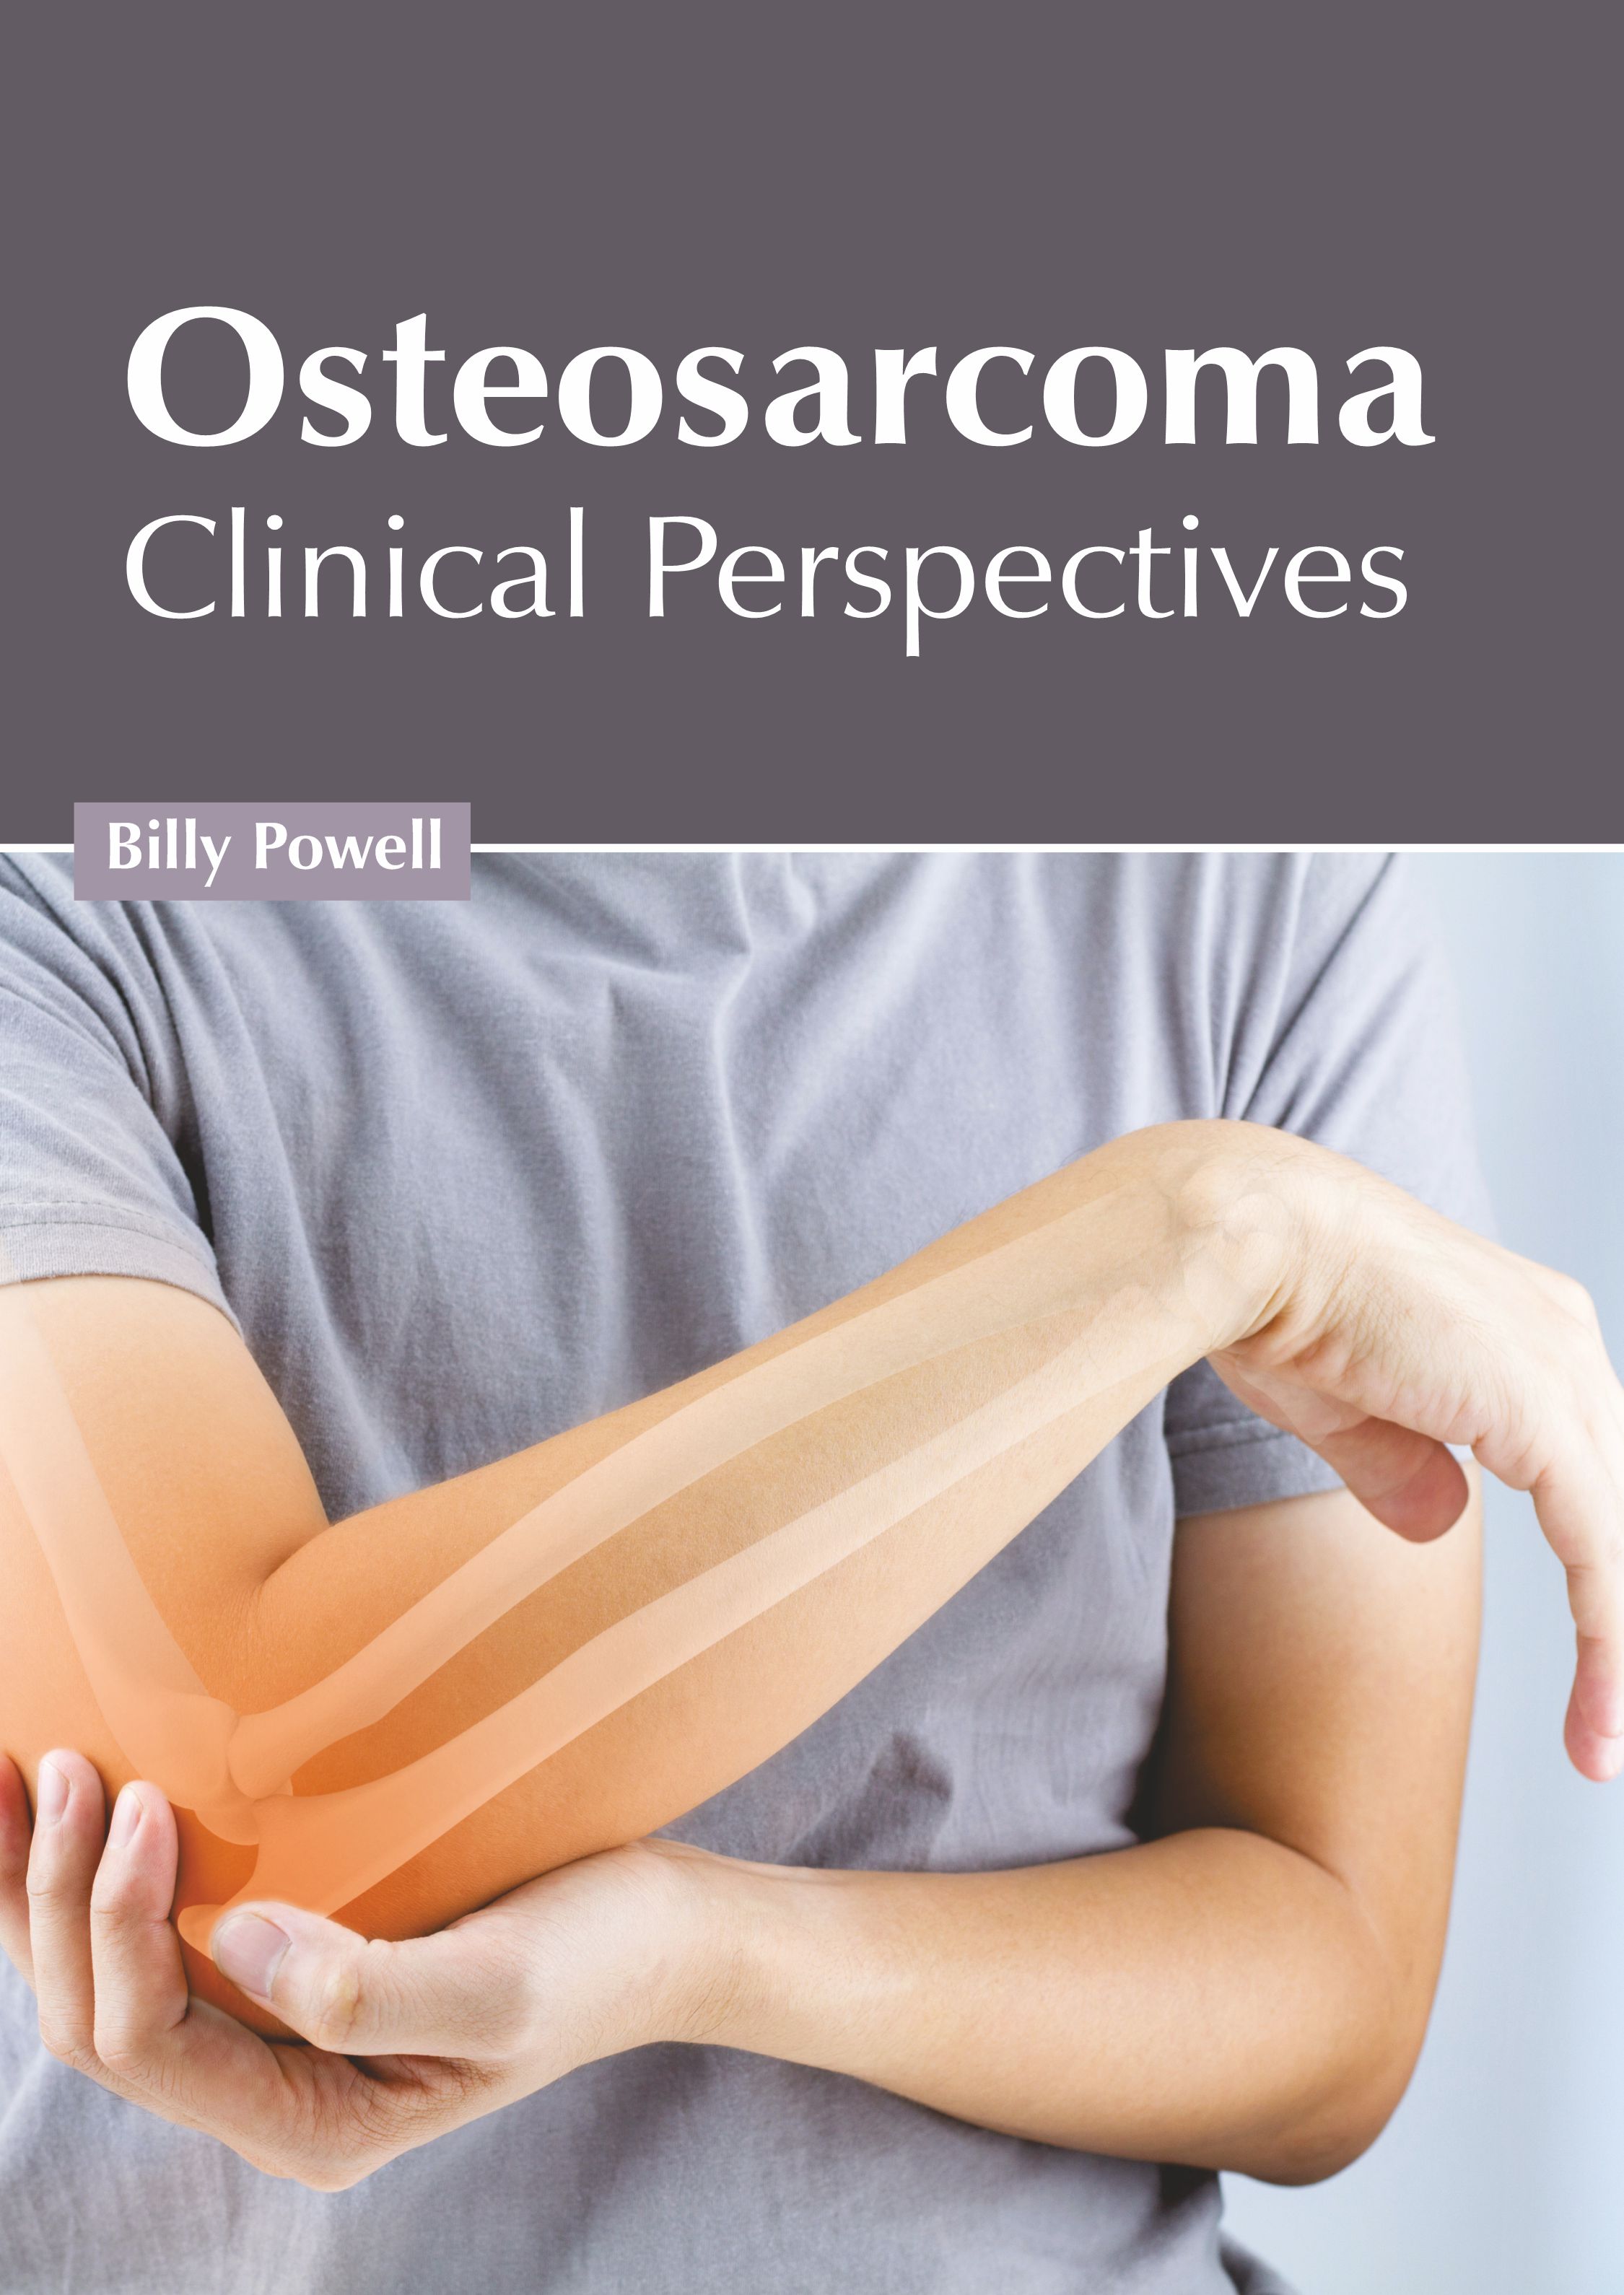 

exclusive-publishers/american-medical-publishers/osteosarcoma-clinical-perspectives-9781639273690